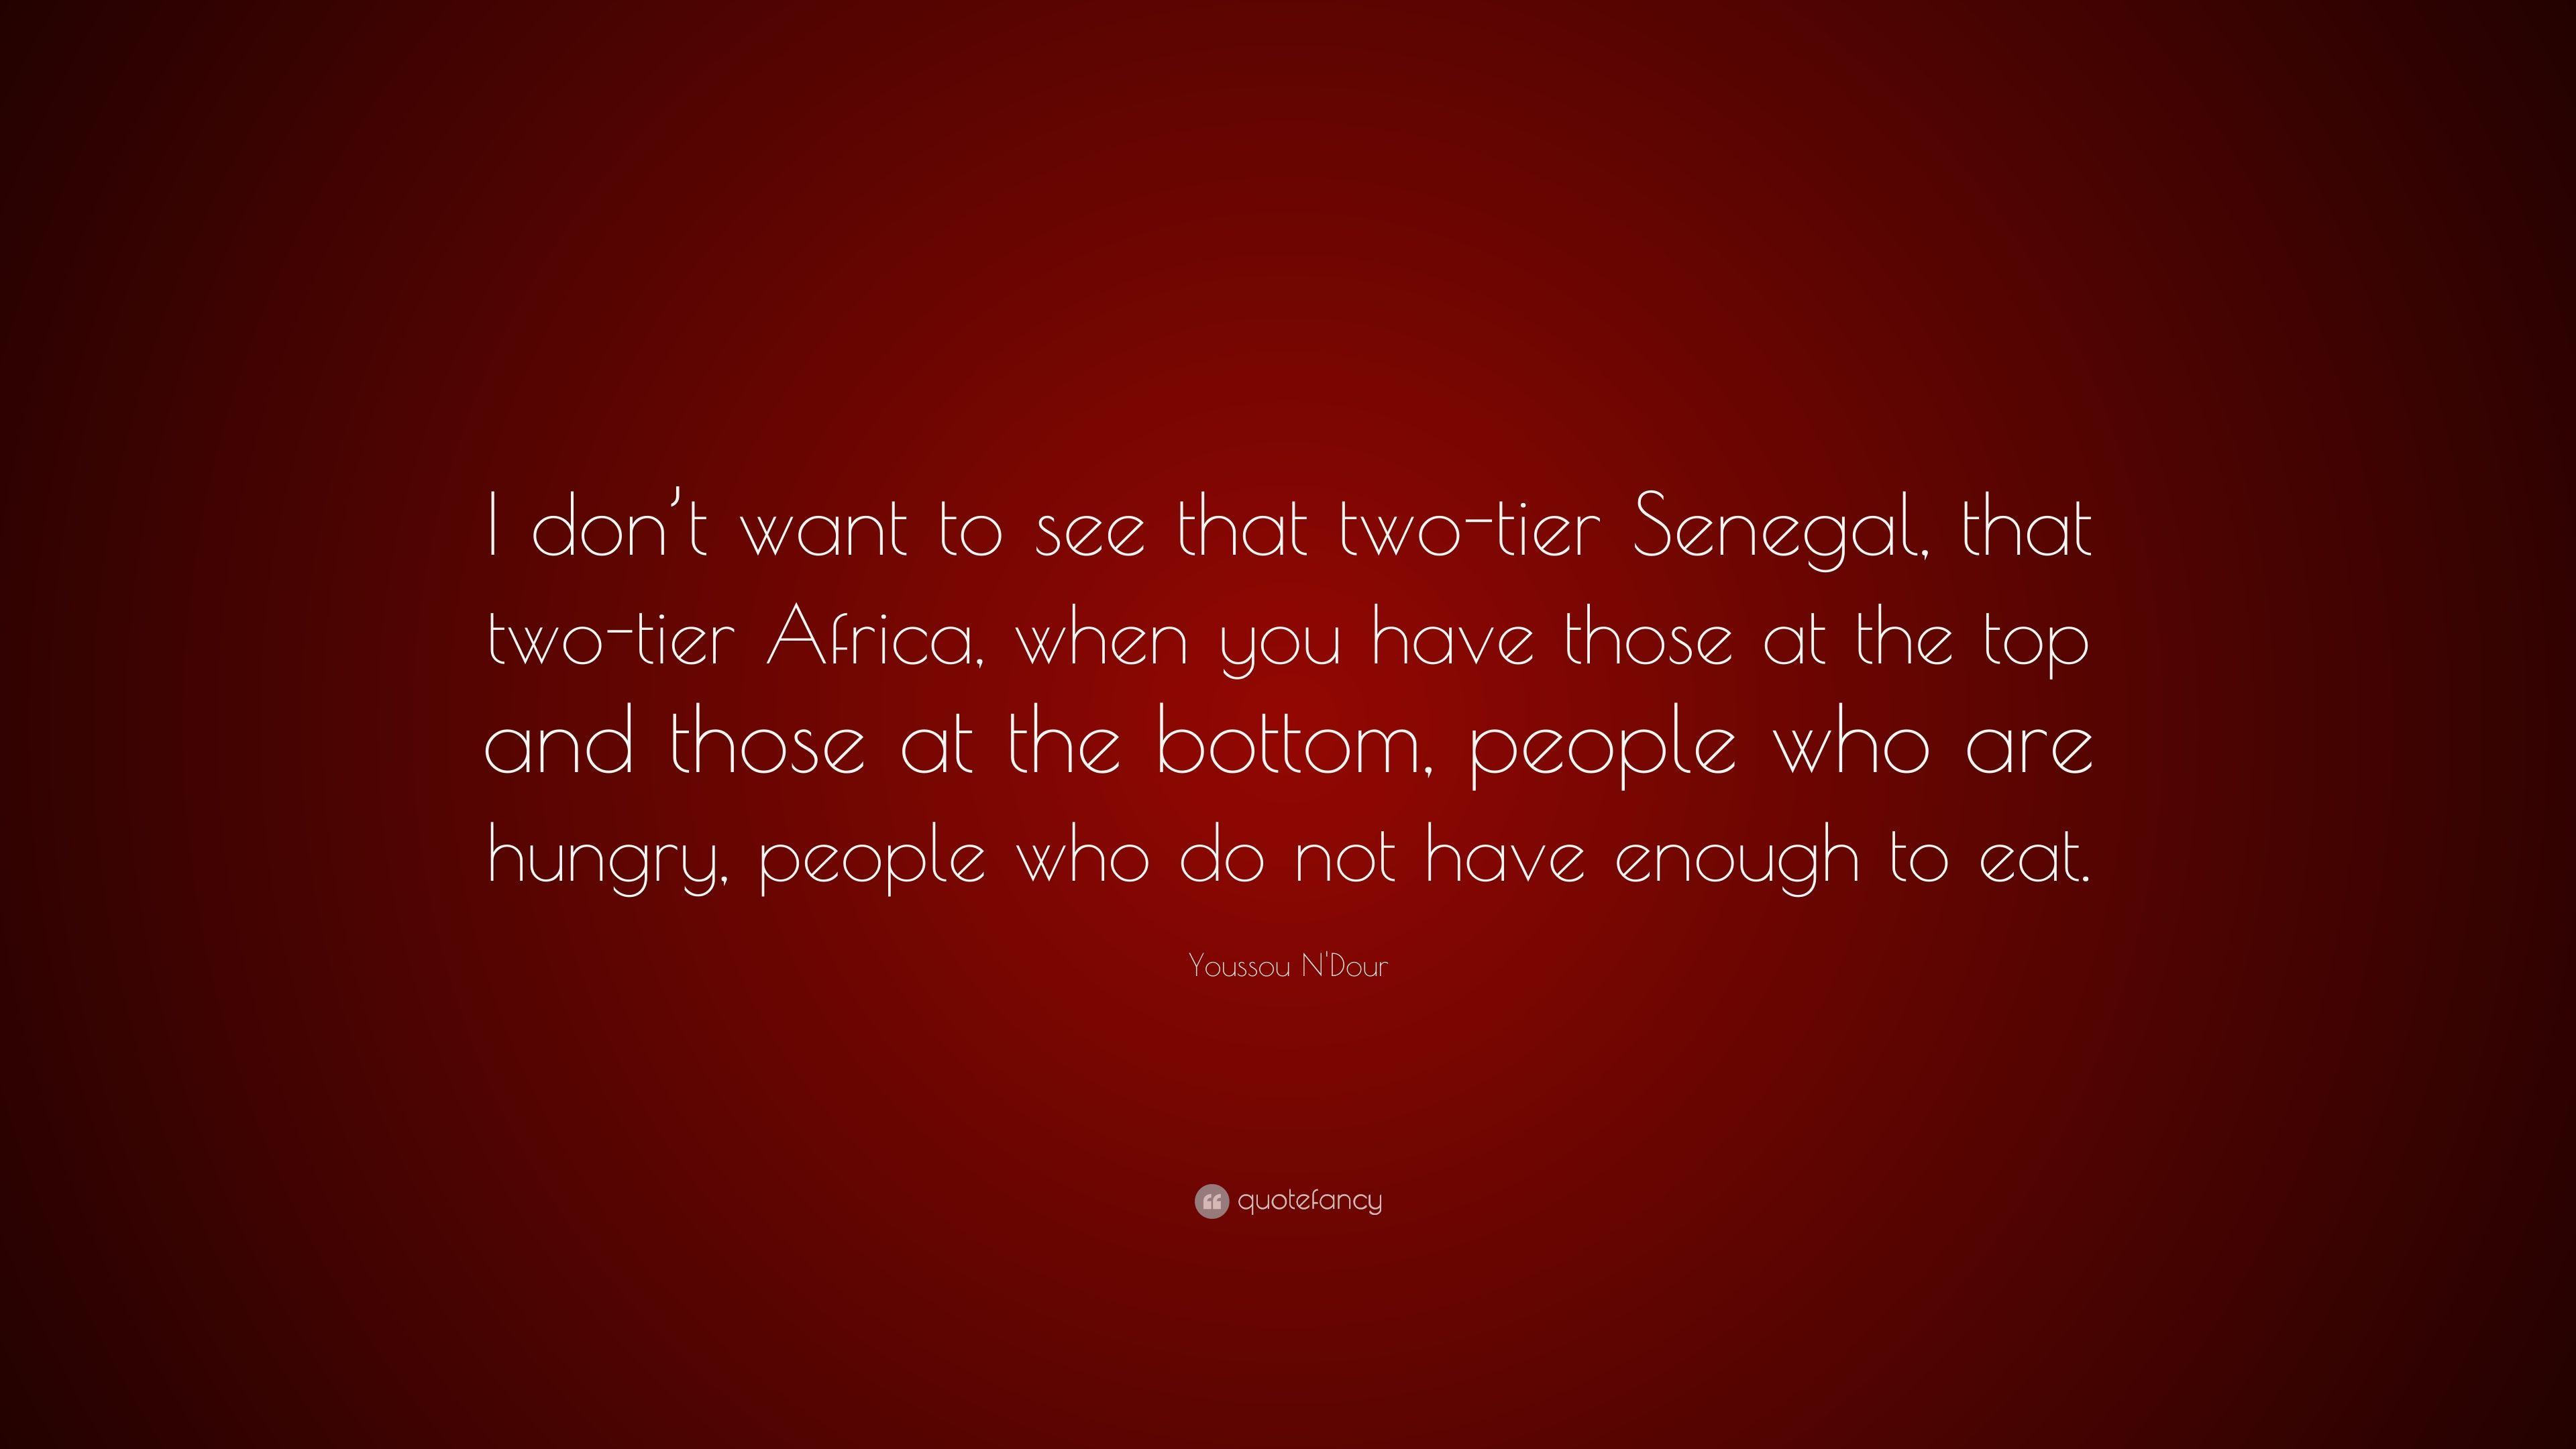 Youssou N'Dour Quote: “I Don't Want To See That Two Tier Senegal